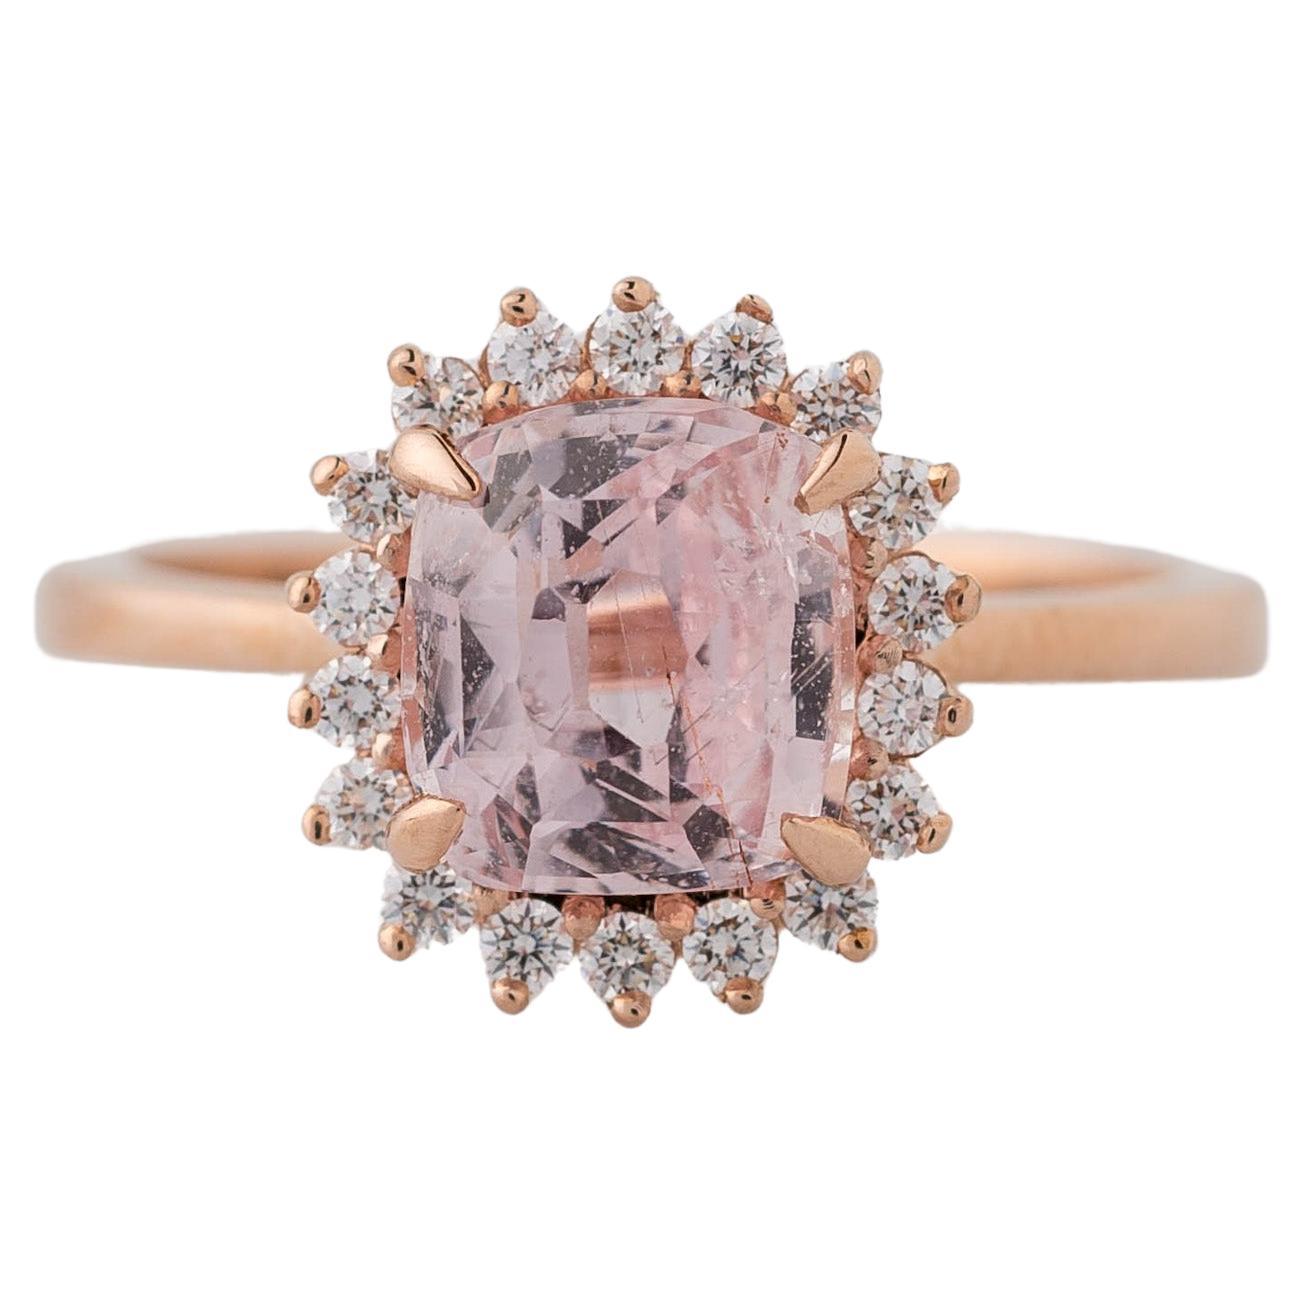 For Sale:  GIA Certified 2.46 Carat Cushion Pink Sapphire Diamond Halo Engagement Ring.